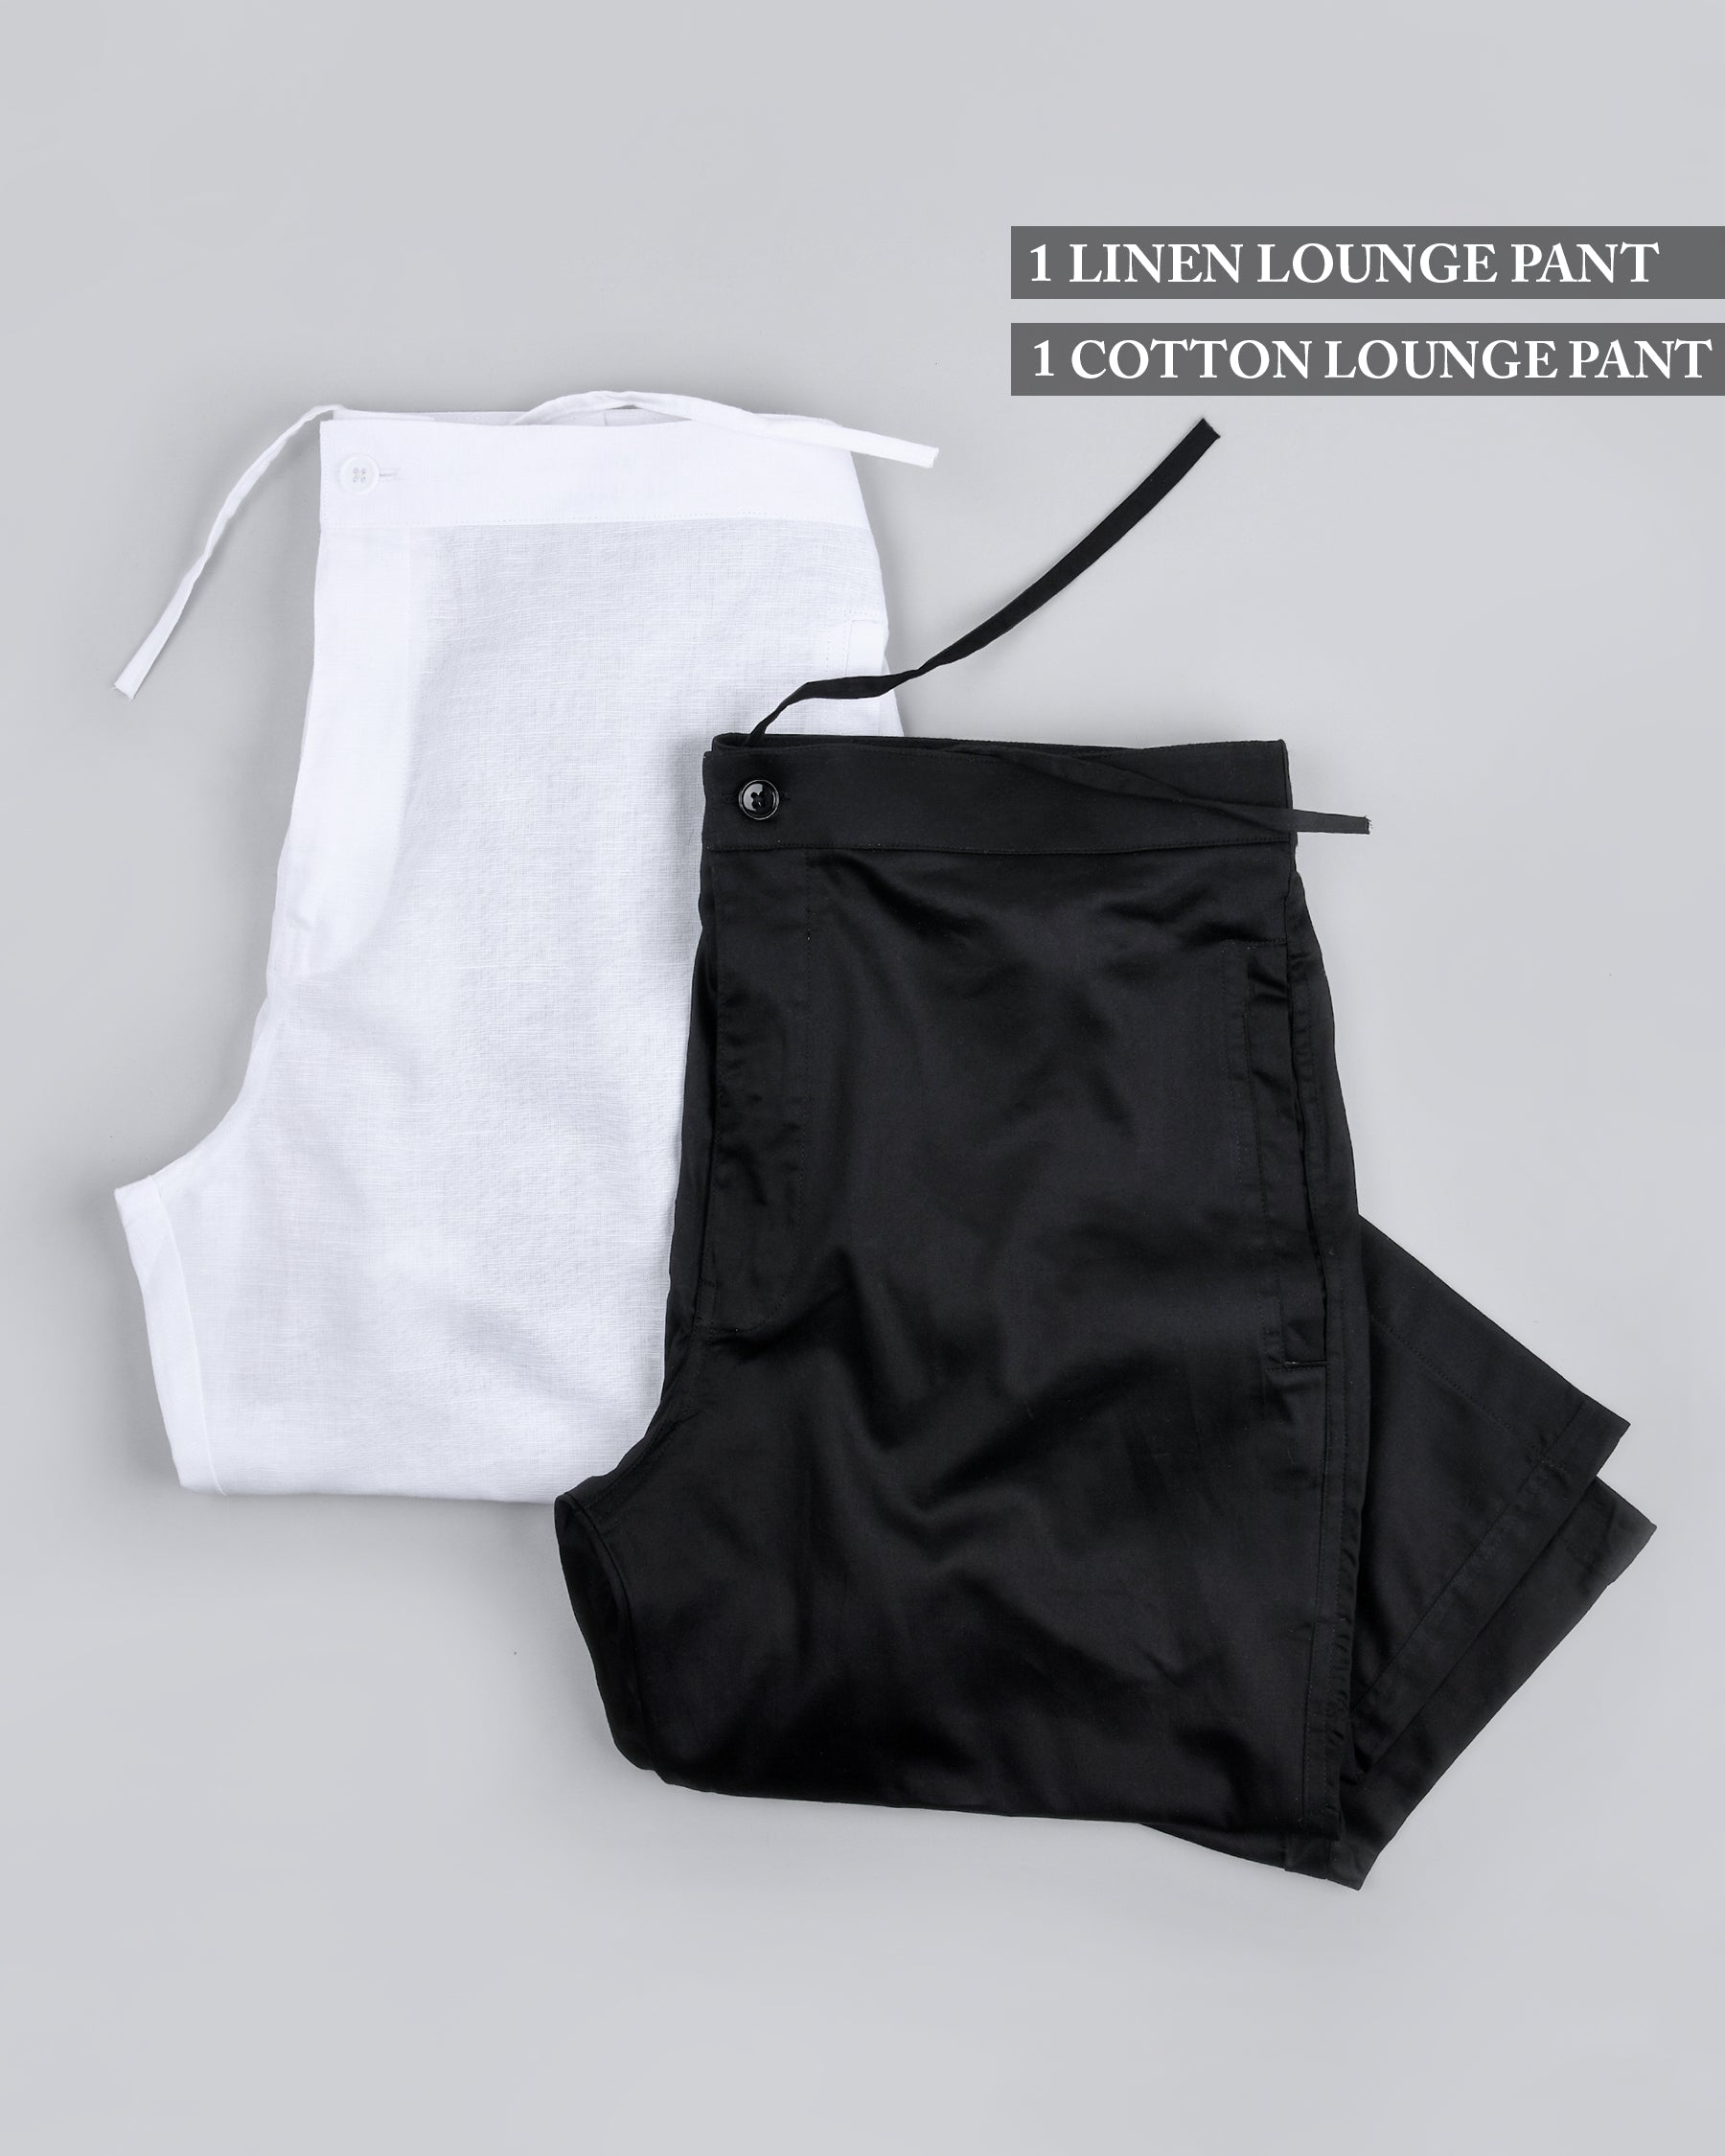 One white Linen and One Black Cotton Lounge Pants LP015-30, LP015-32, LP015-38, LP015-44, LP015-36, LP015-42, LP015-28, LP015-34, LP015-40